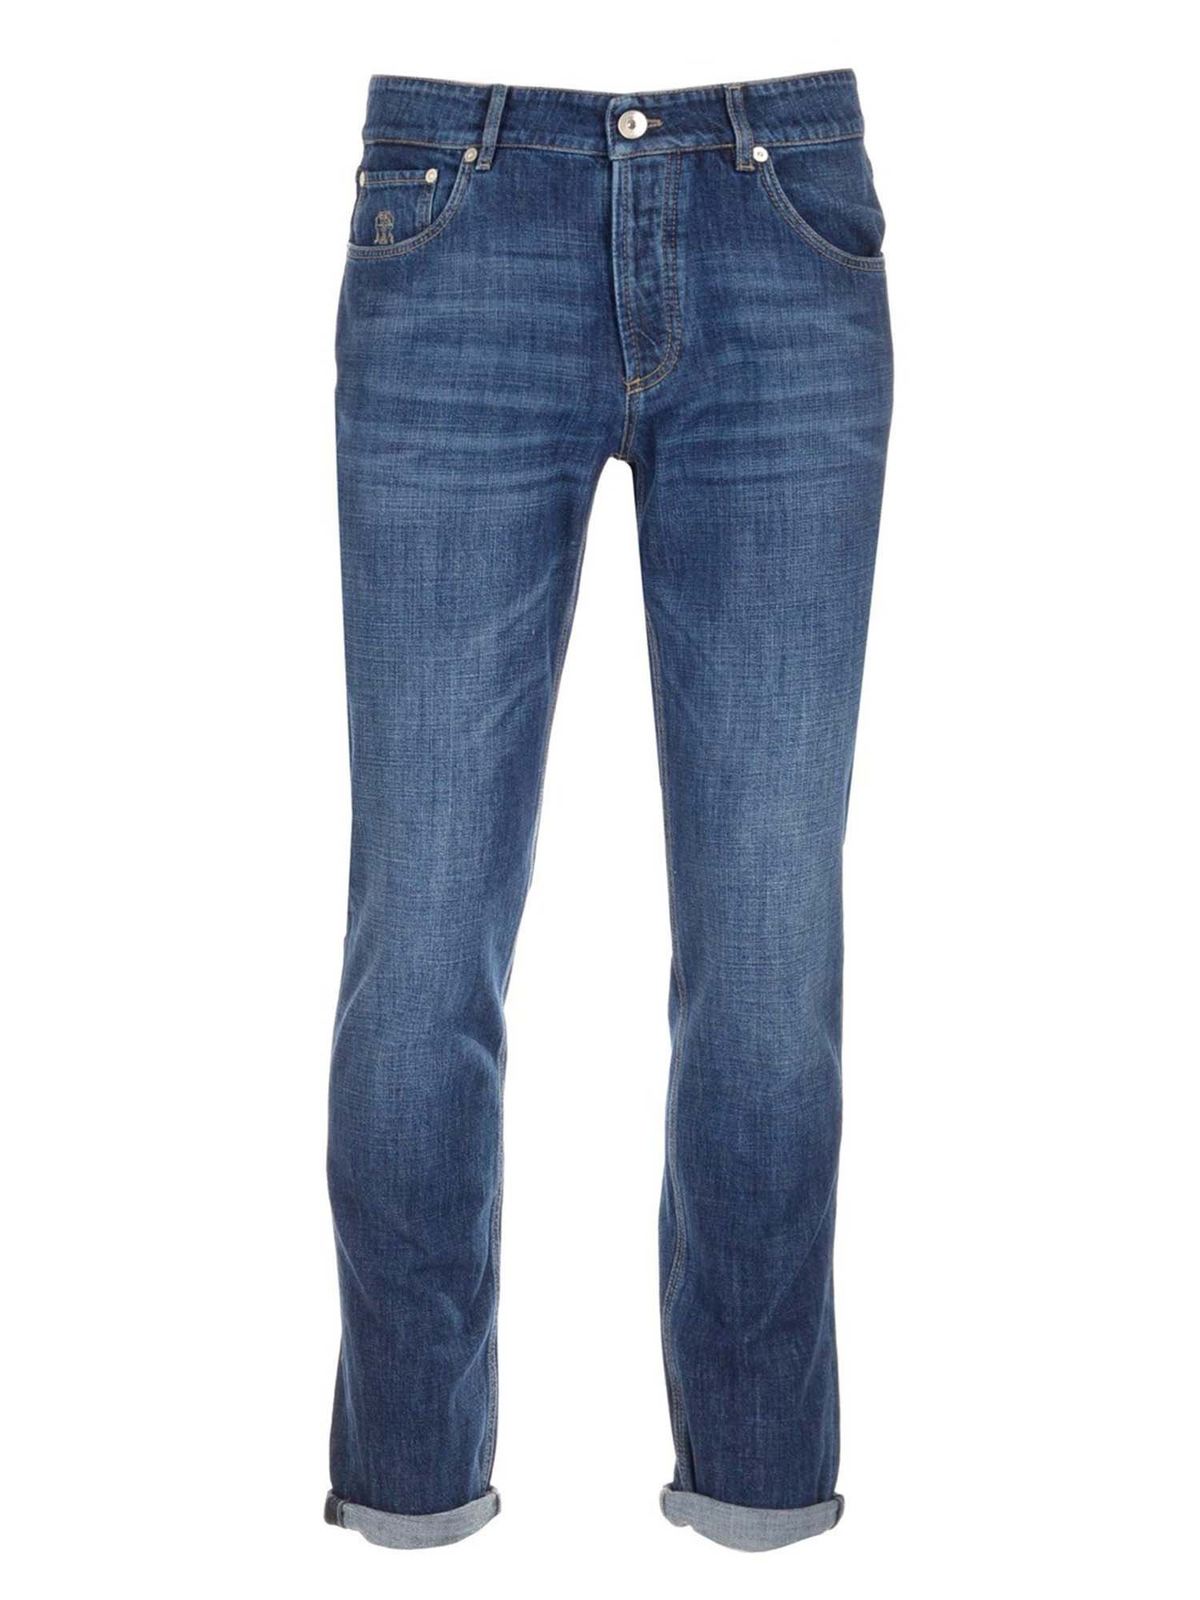 Brunello Cucinelli - Traditional Fit jeans in blue - straight leg jeans ...